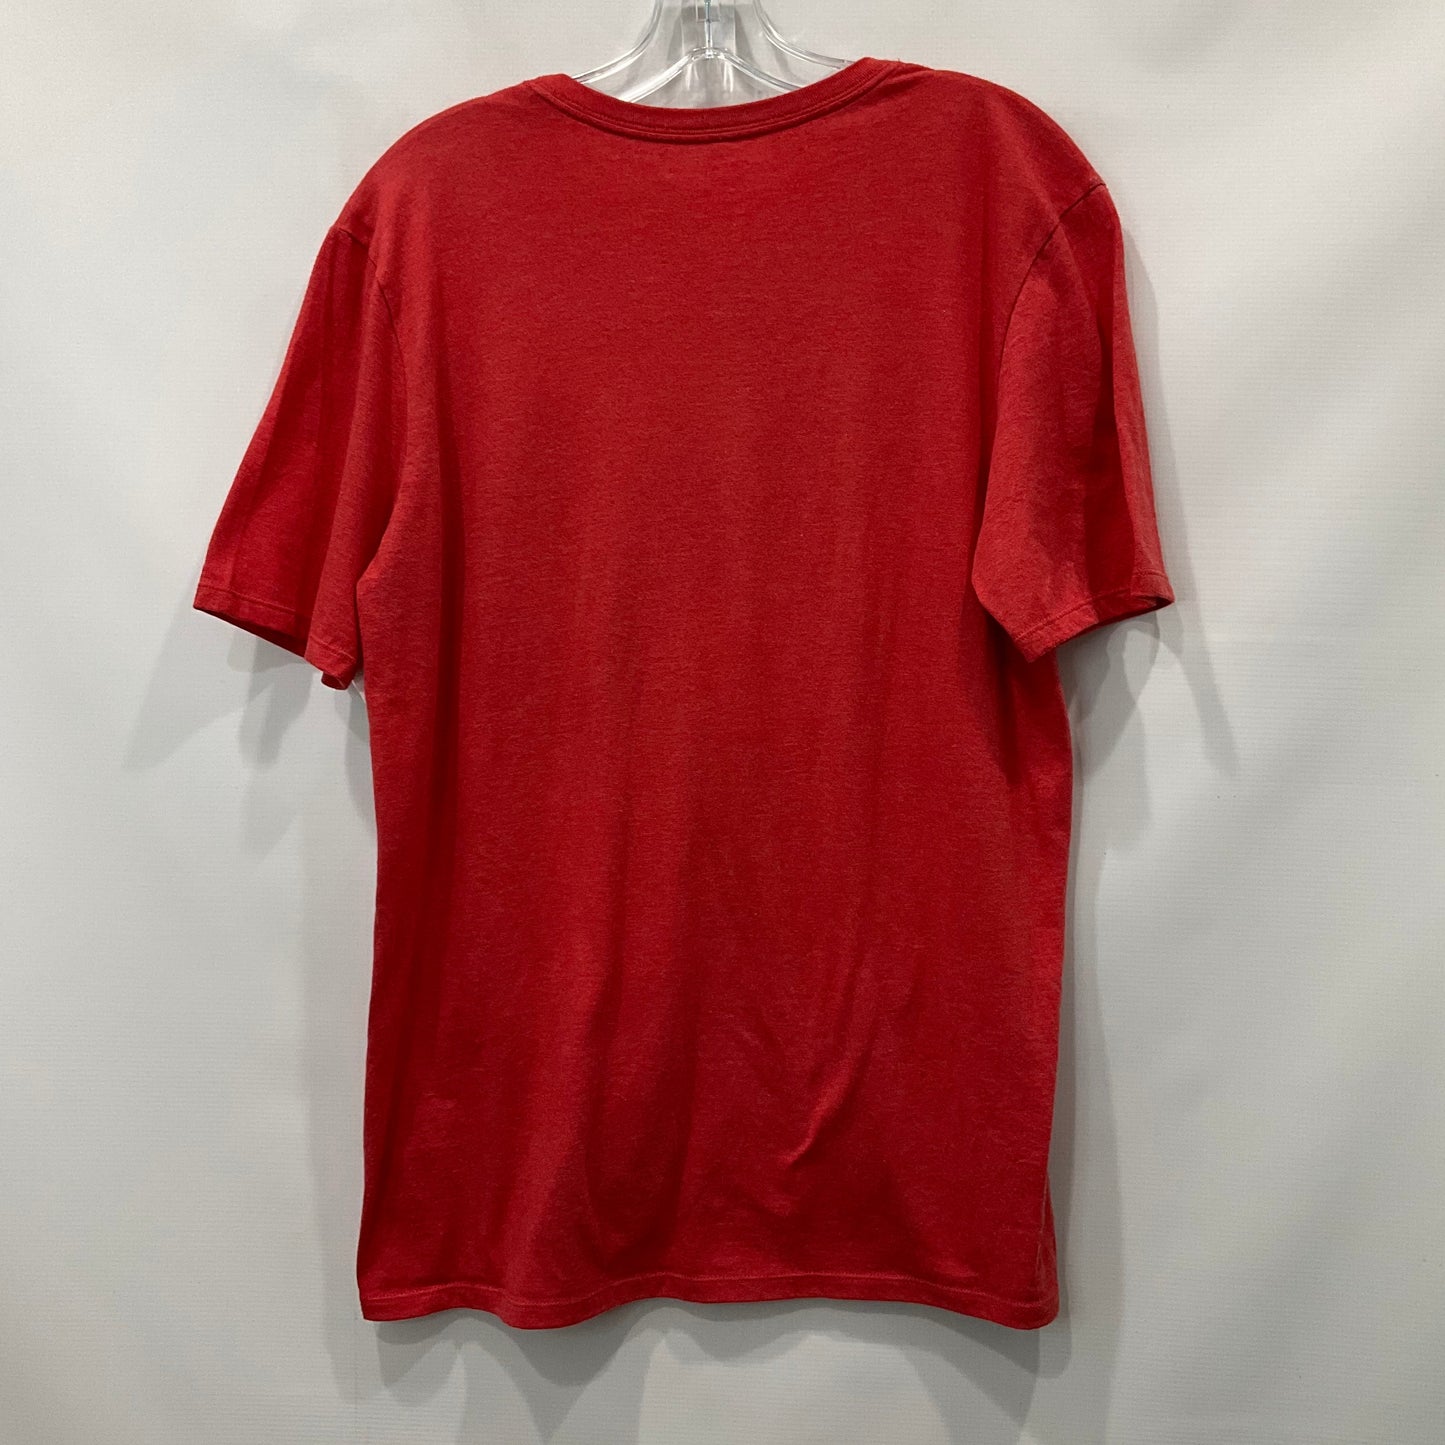 Red Top Short Sleeve Nike Apparel, Size M